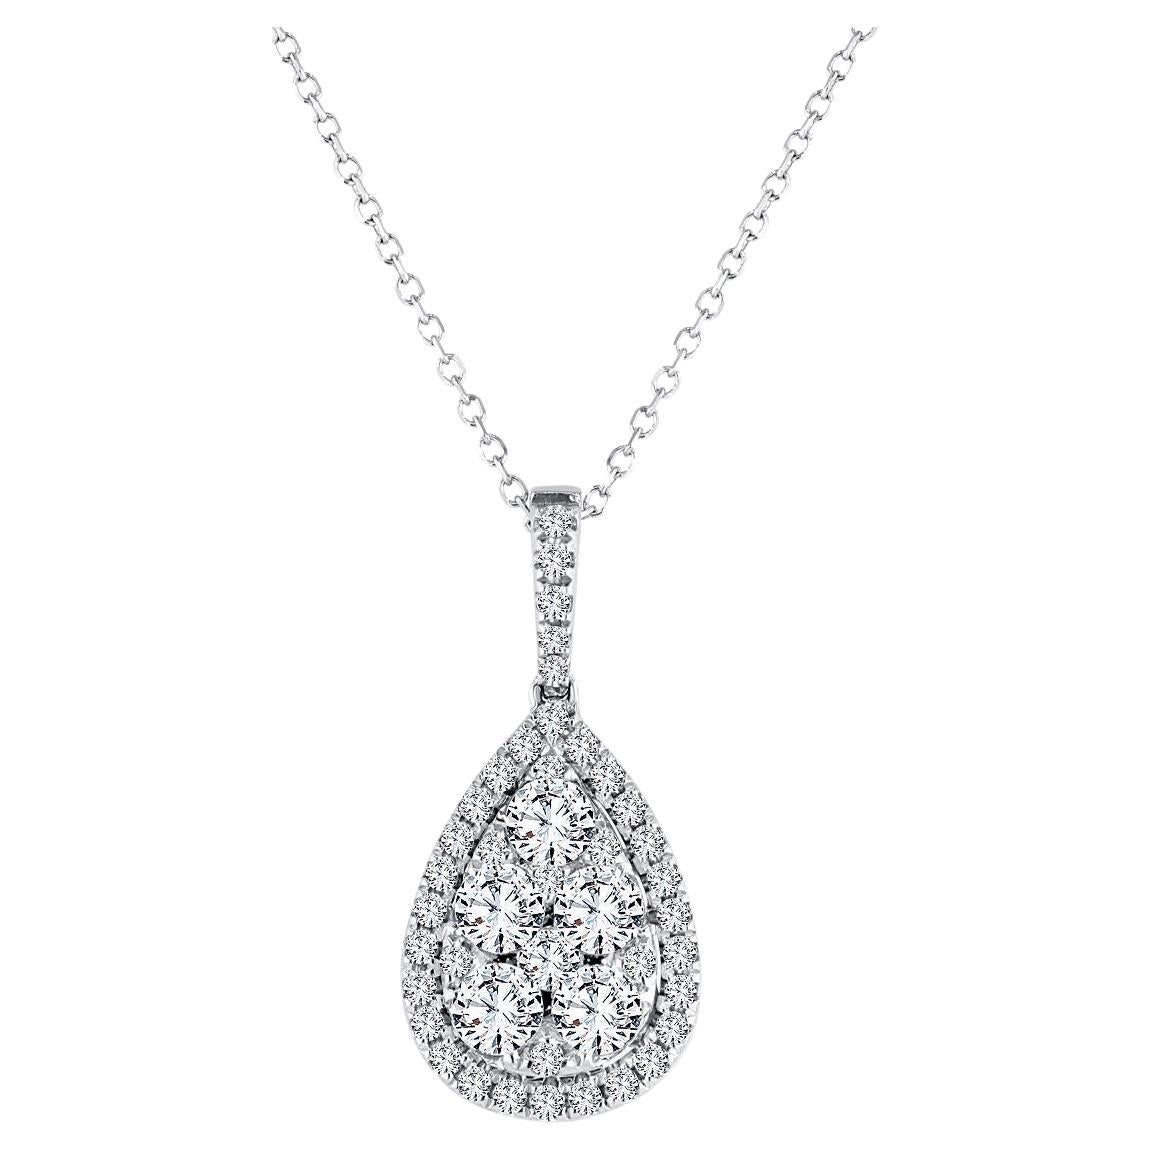 0.76 Carat Total Diamond Weight Pear Illusion Pendant in 14k White Gold ref2331